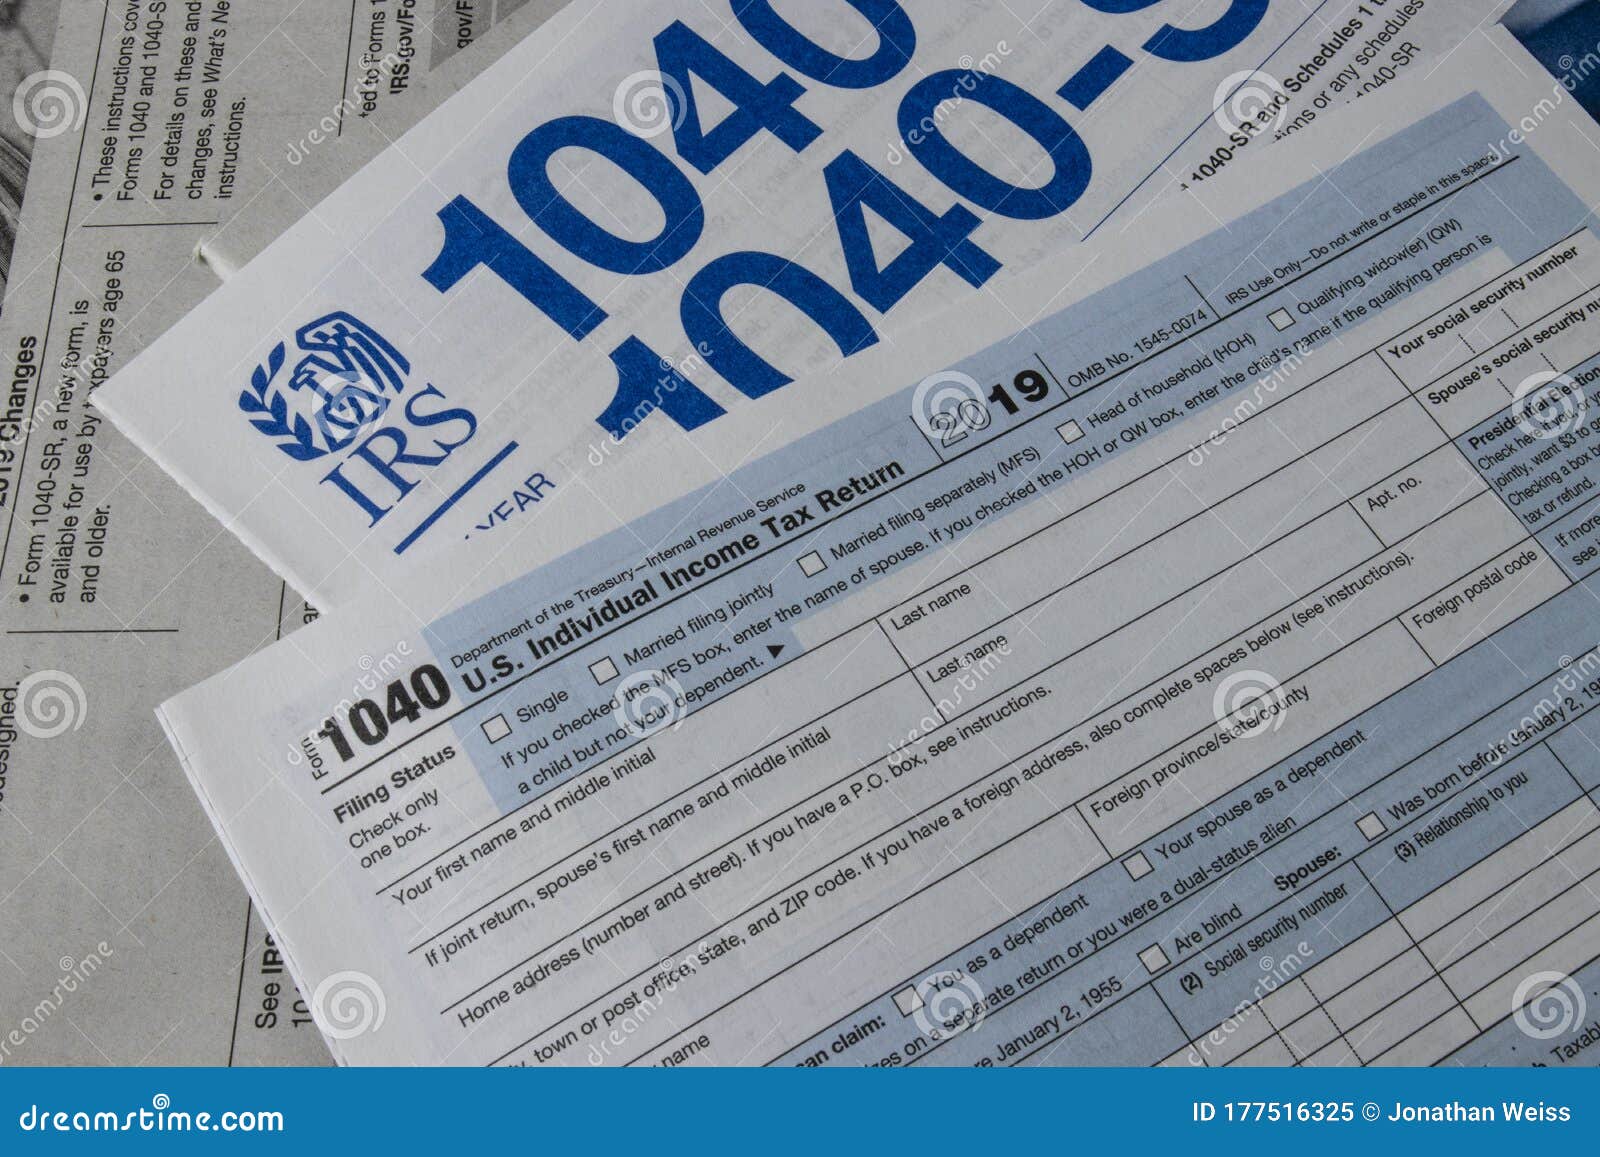 1040 Tax Forms From The IRS. Form 1040 Is Used By U.S. Taxpayers To